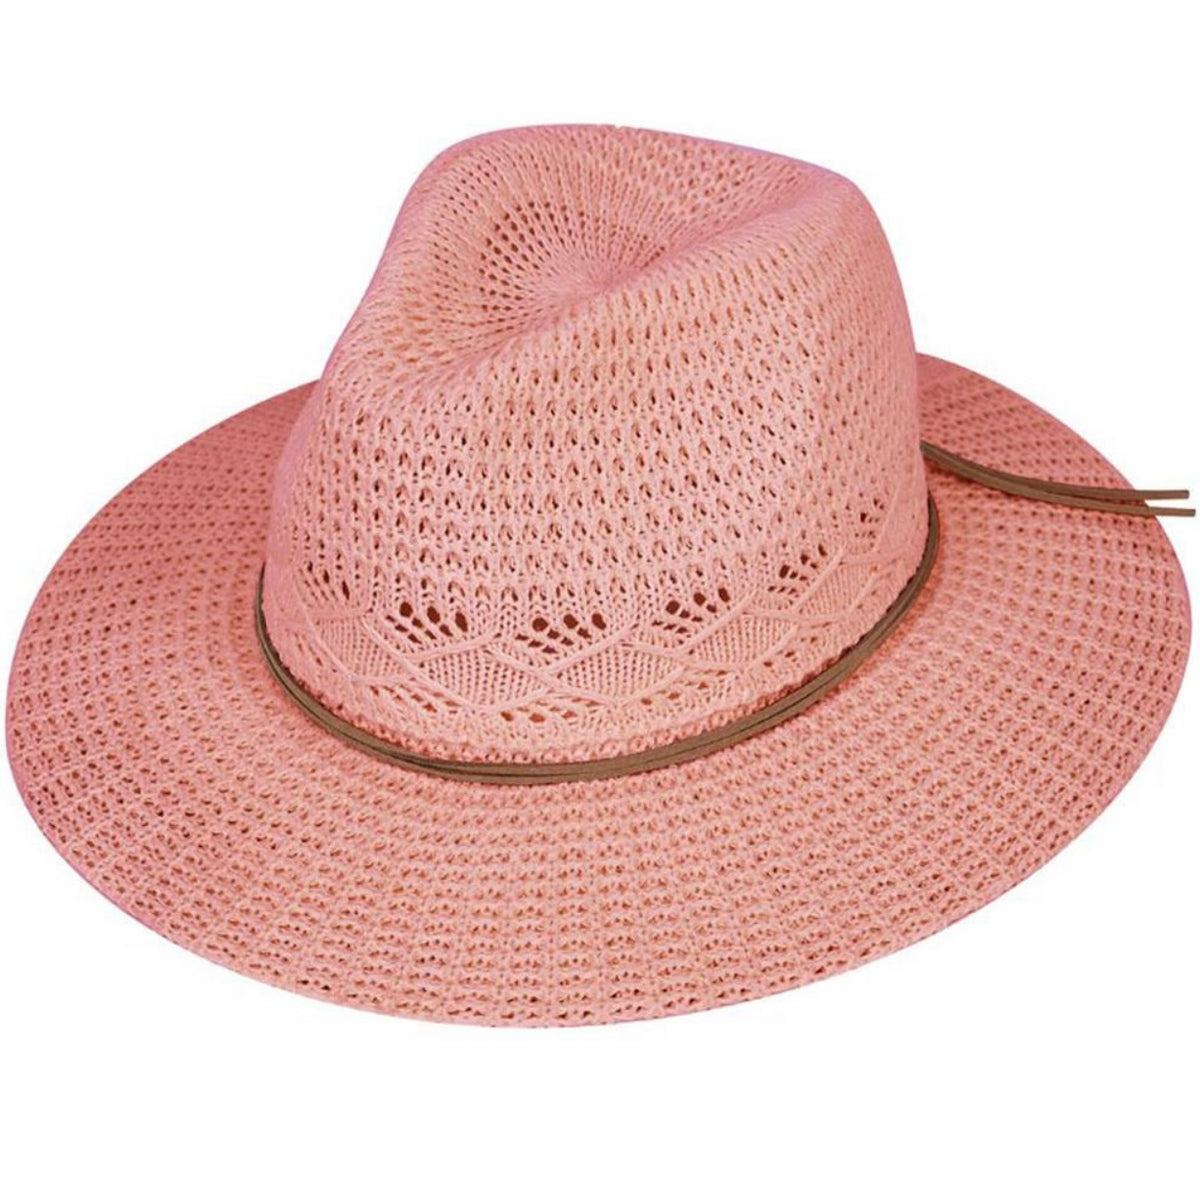 CC MULTI PATTERN PANAMA HAT WITH SUEDE STRING BAND - ROSE